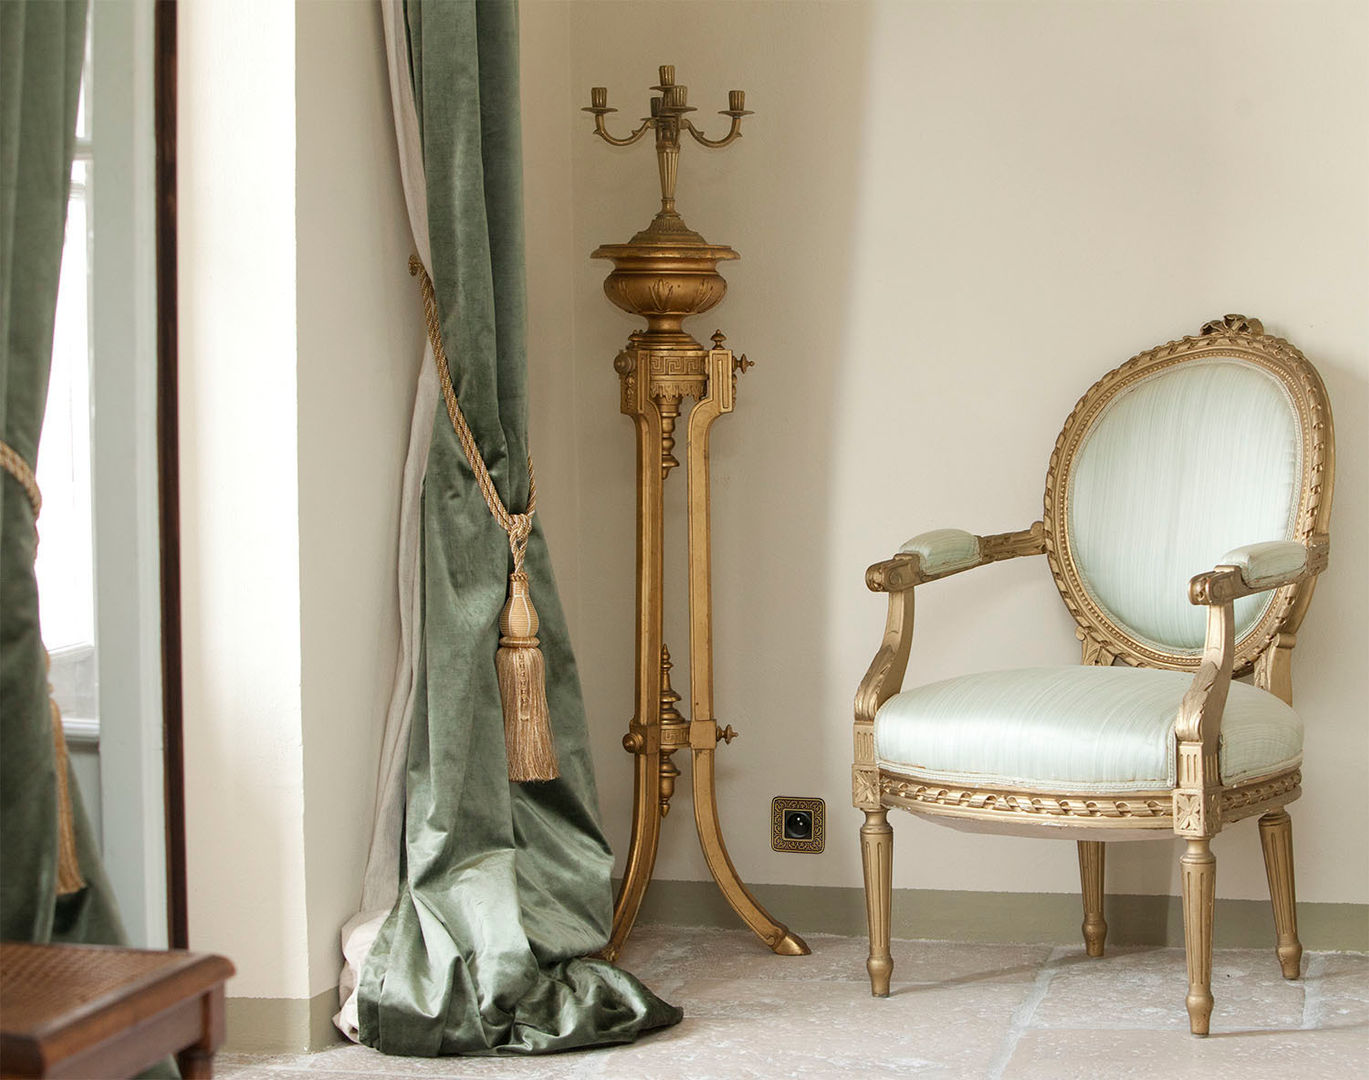 FEDE - Princely luxury with chic style, SWITCH & LIGHT SWITCH & LIGHT غرف اخرى Pet accessories